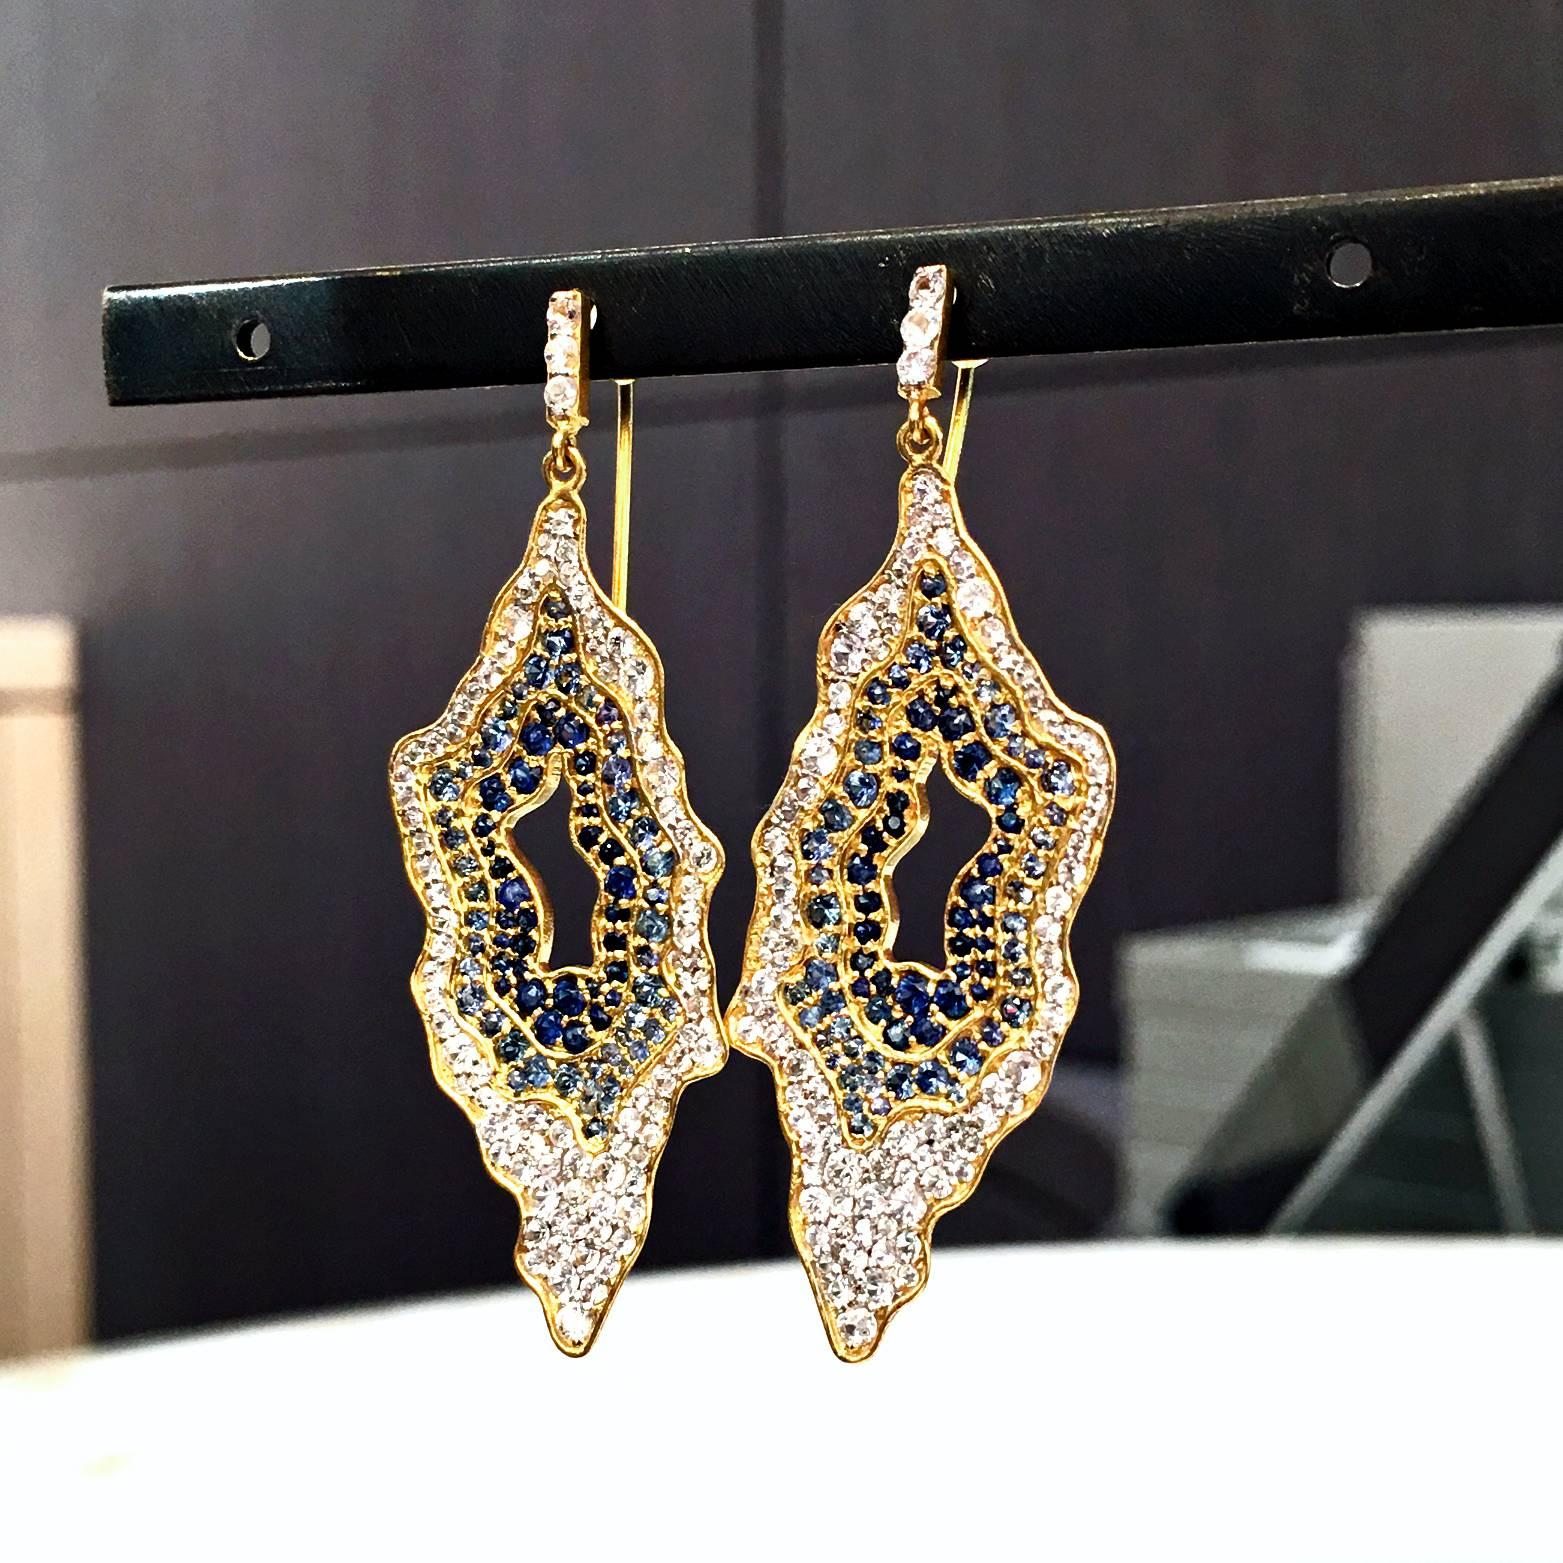 Snow Geode Earrings handcrafted in matte-finished 18k yellow gold with dangling geode elements set with blue sapphires in assorted tones and shimmering white sapphires and attached to 18k yellow gold wires with white sapphire accents. Incredible